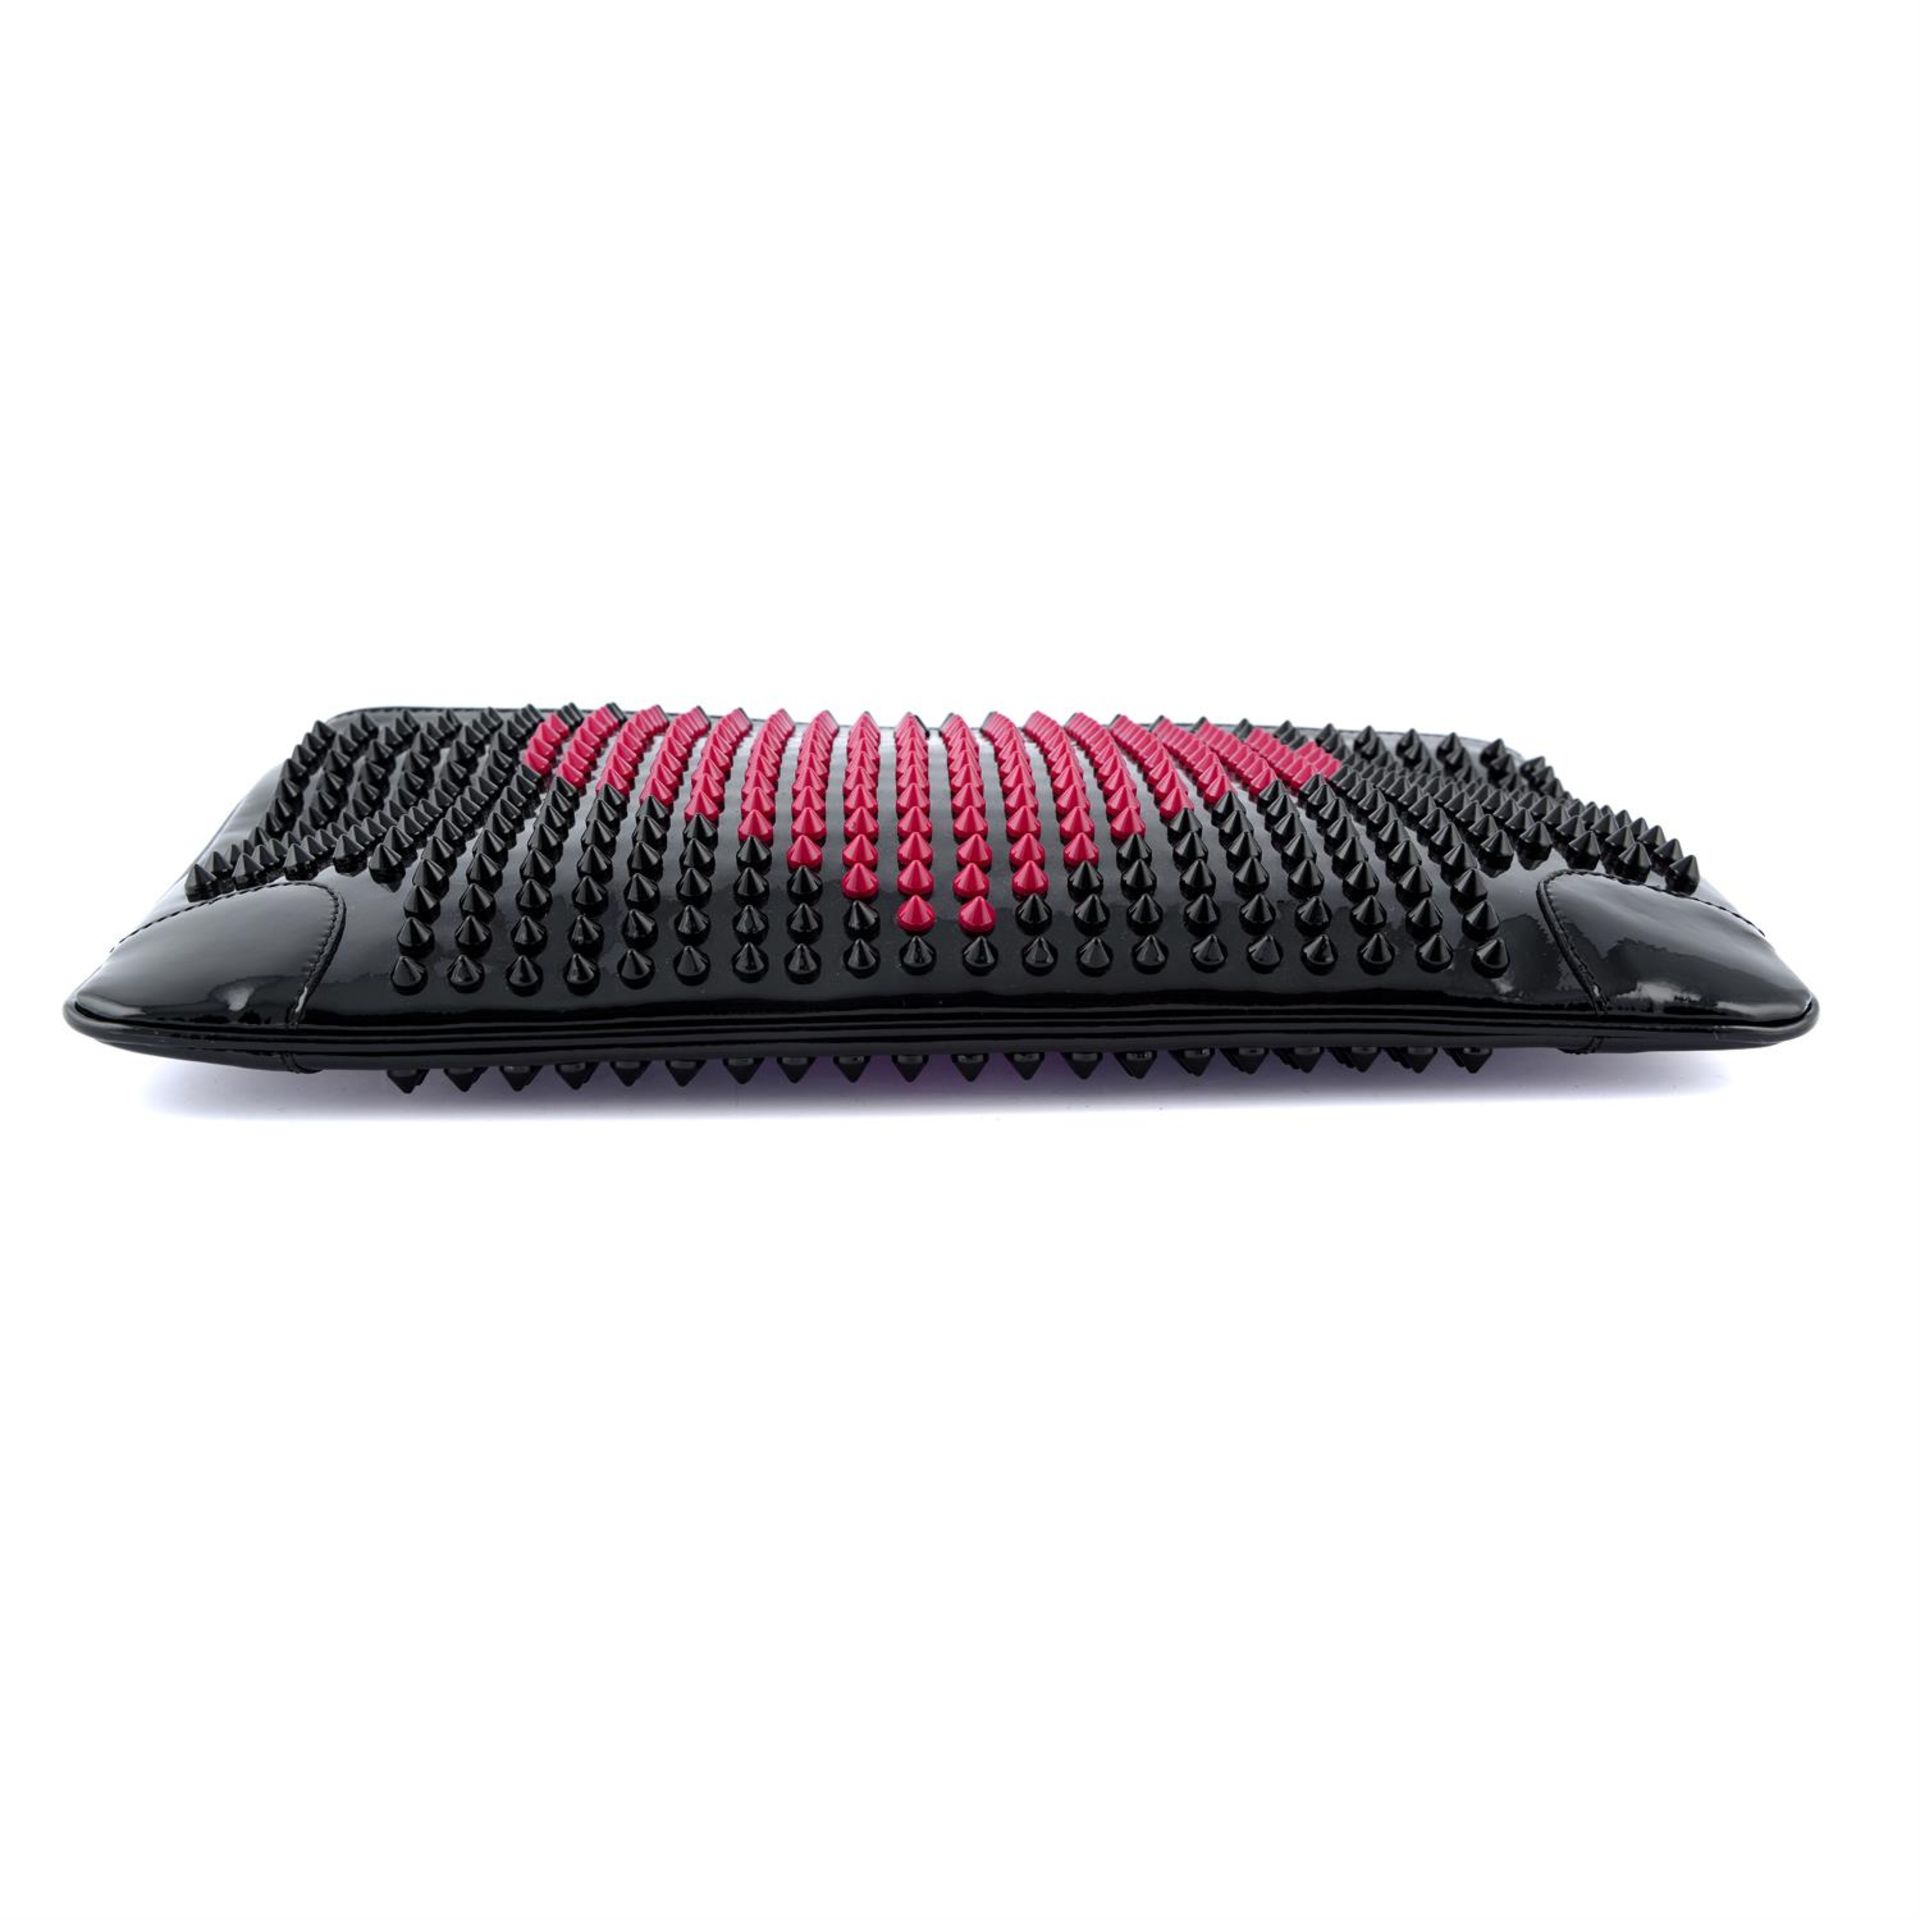 CHRISTIAN LOUBOUTIN - a black patent leather spiked Loubiposh Valentines clutch bag. - Image 4 of 4